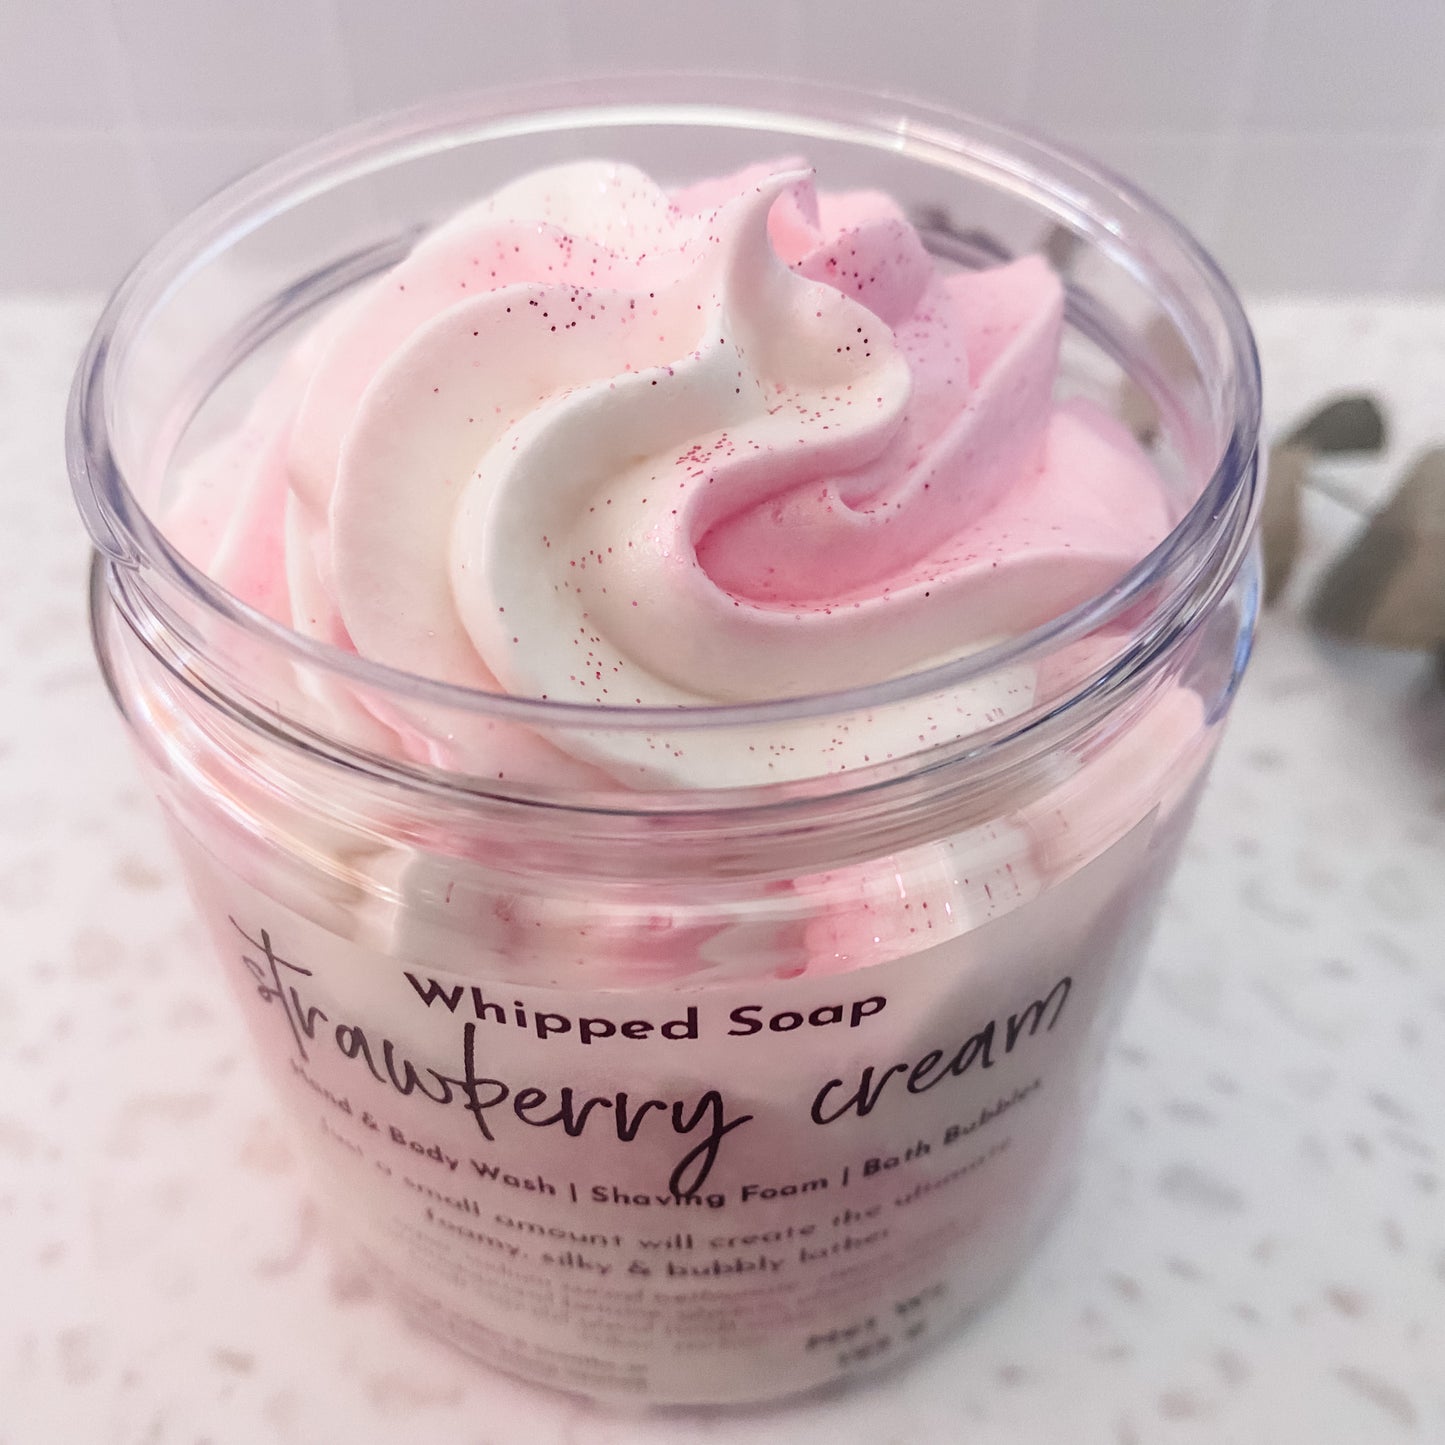 a-single-open-jar-of-handmade-fluffy-whipped-soap